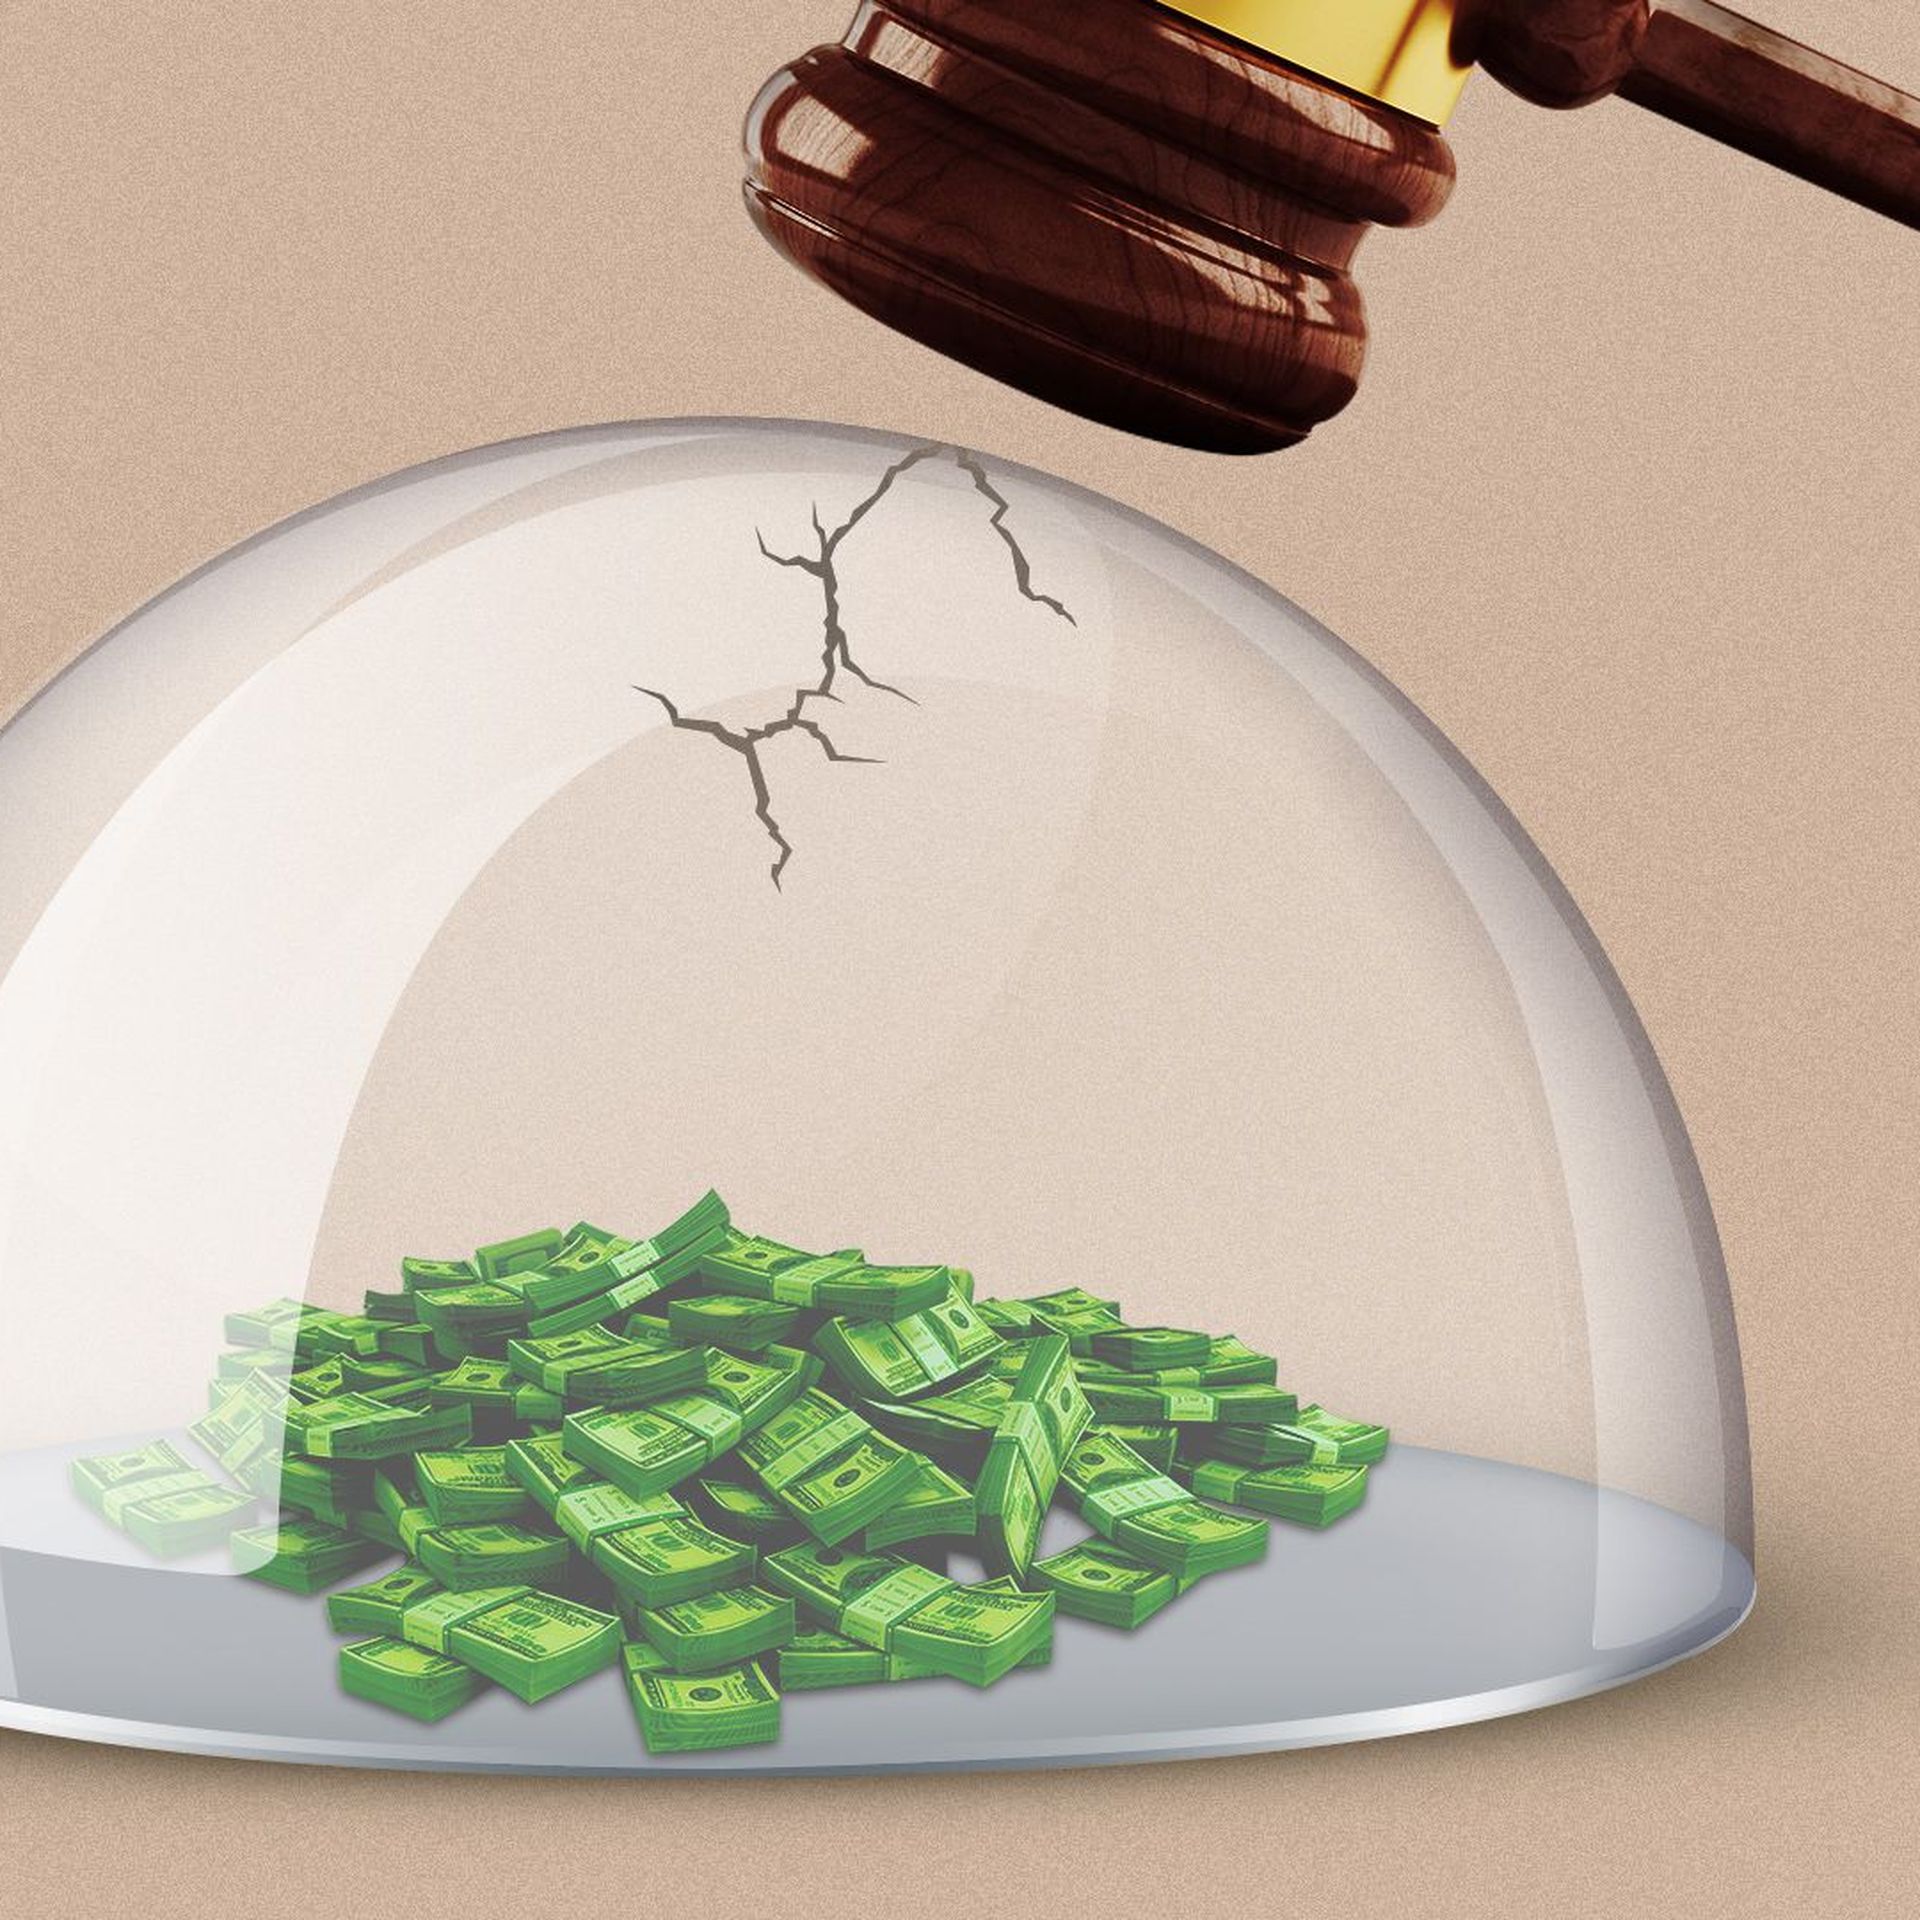 Illustration of a pile of money under a cracked glass dome with a gavel hovering overhead. 